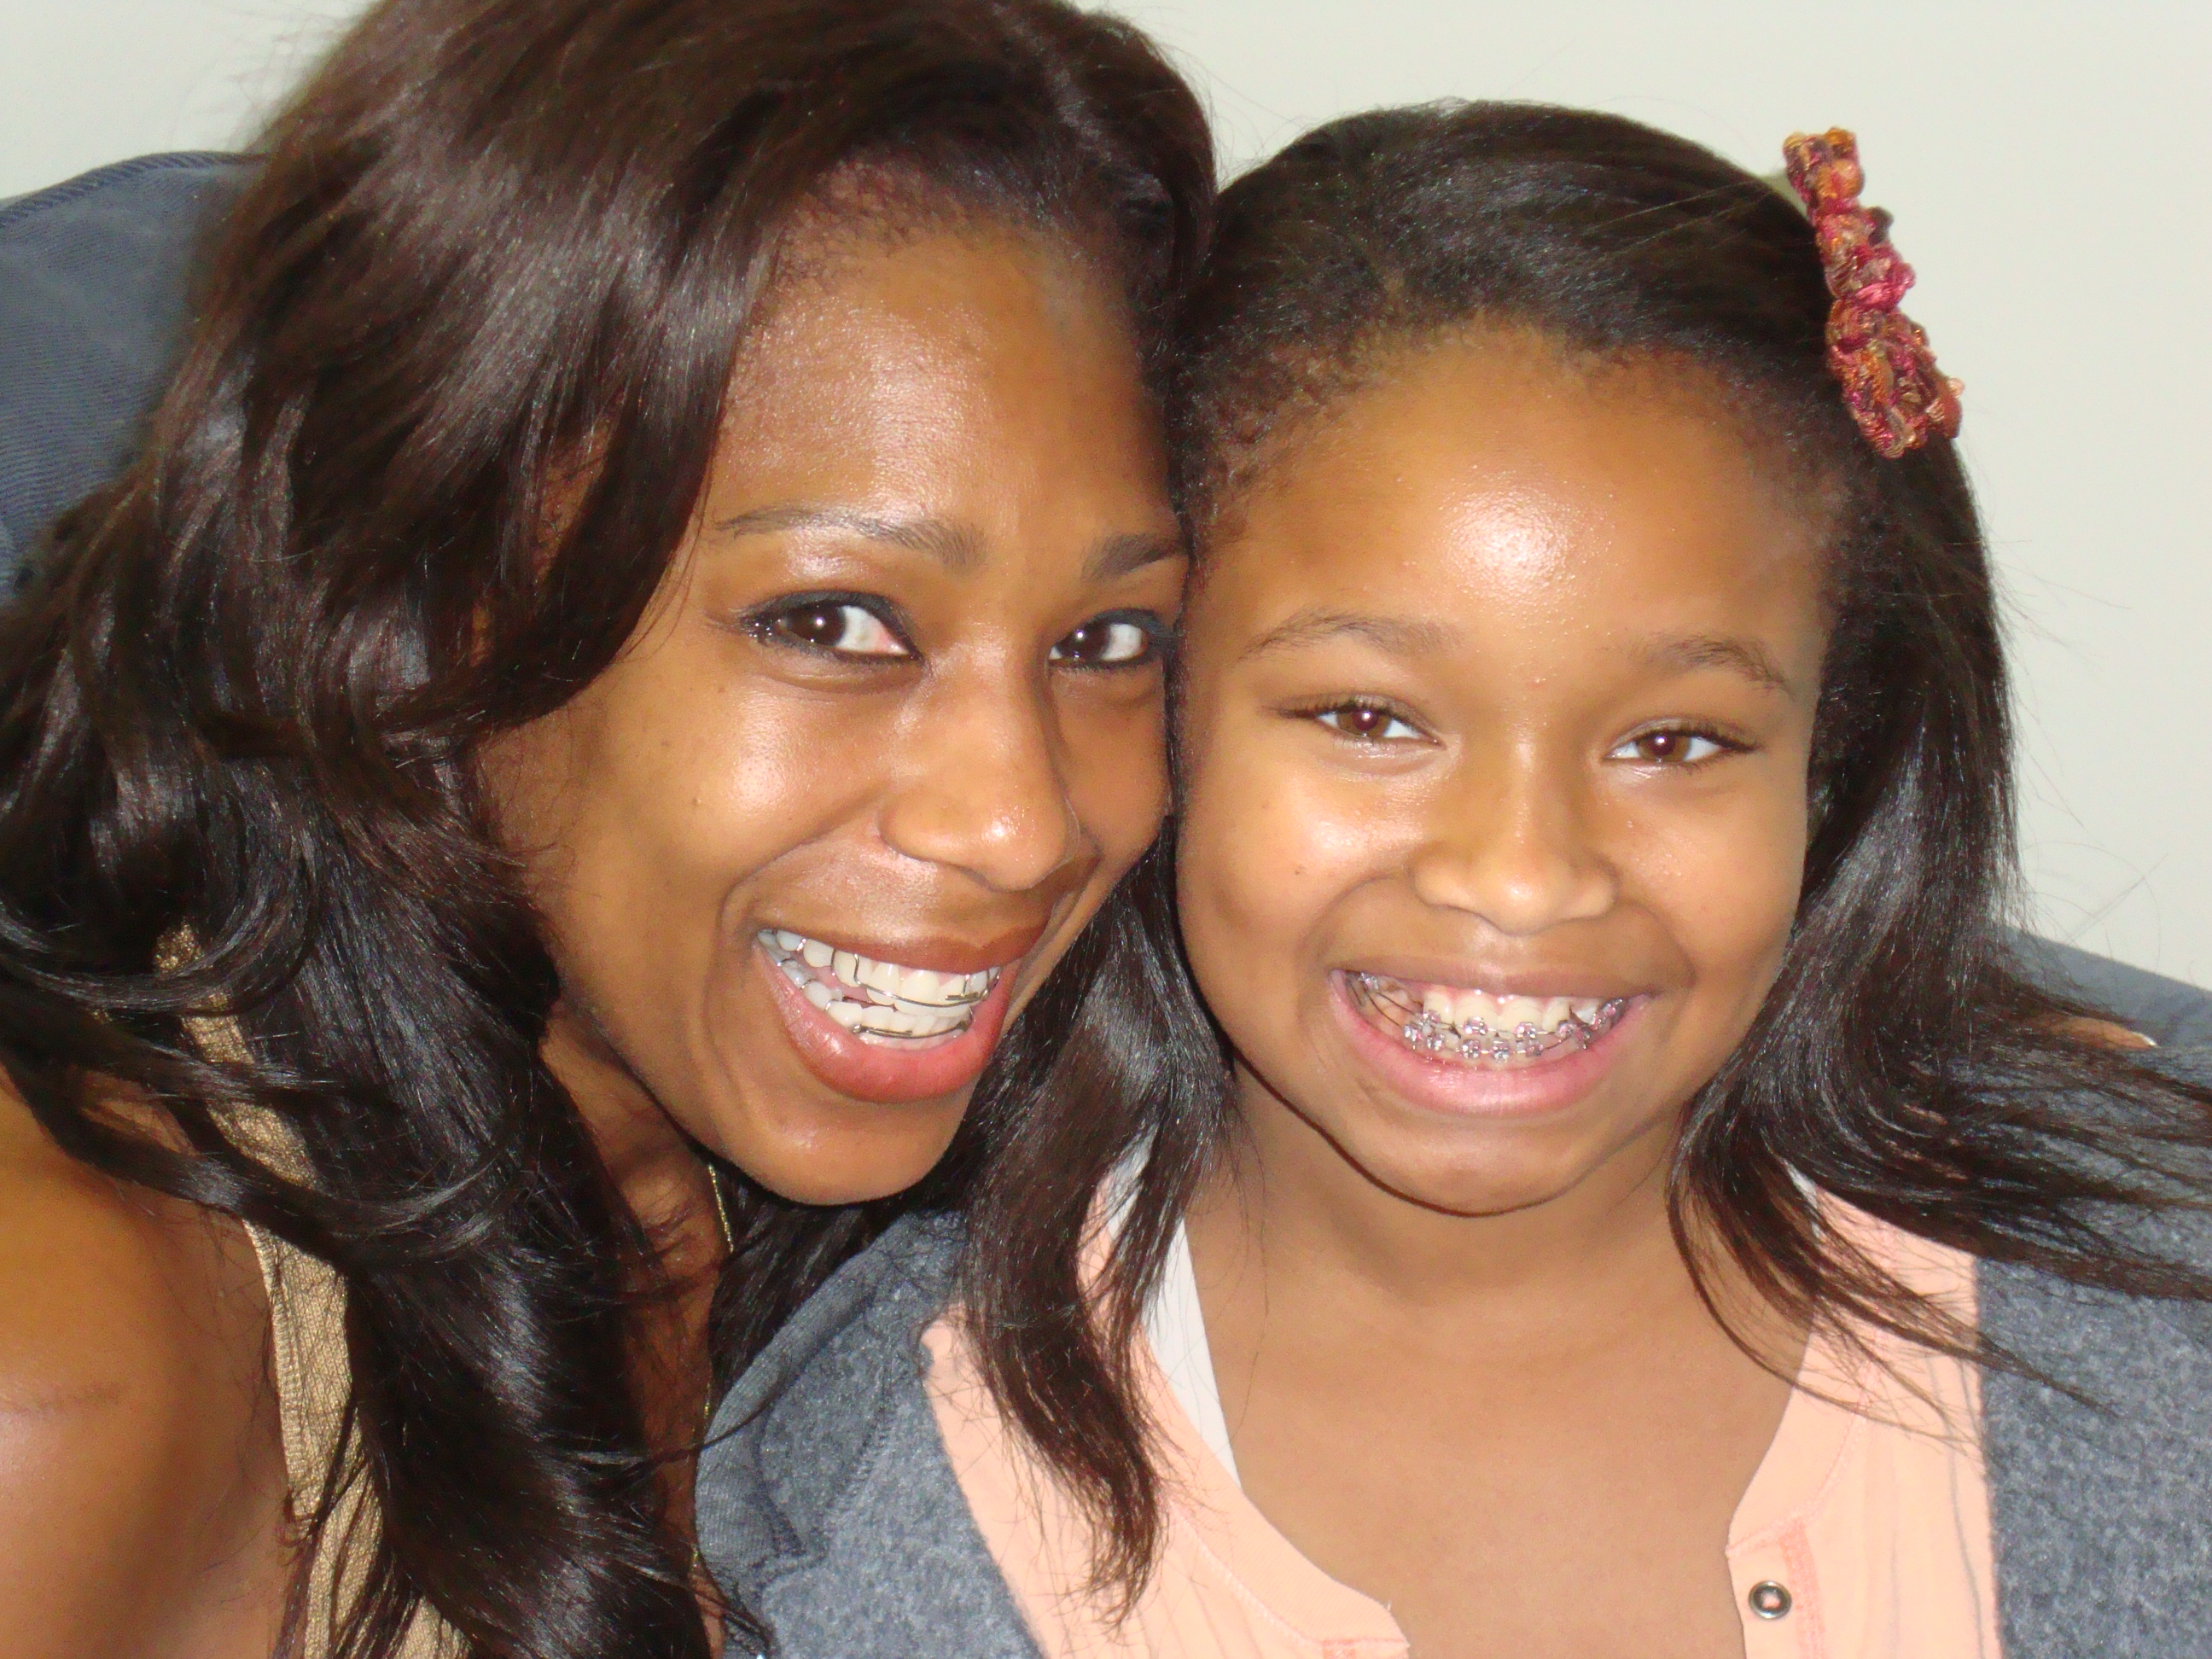 Kiara and Dawnn Lewis with make up braces on the set of 